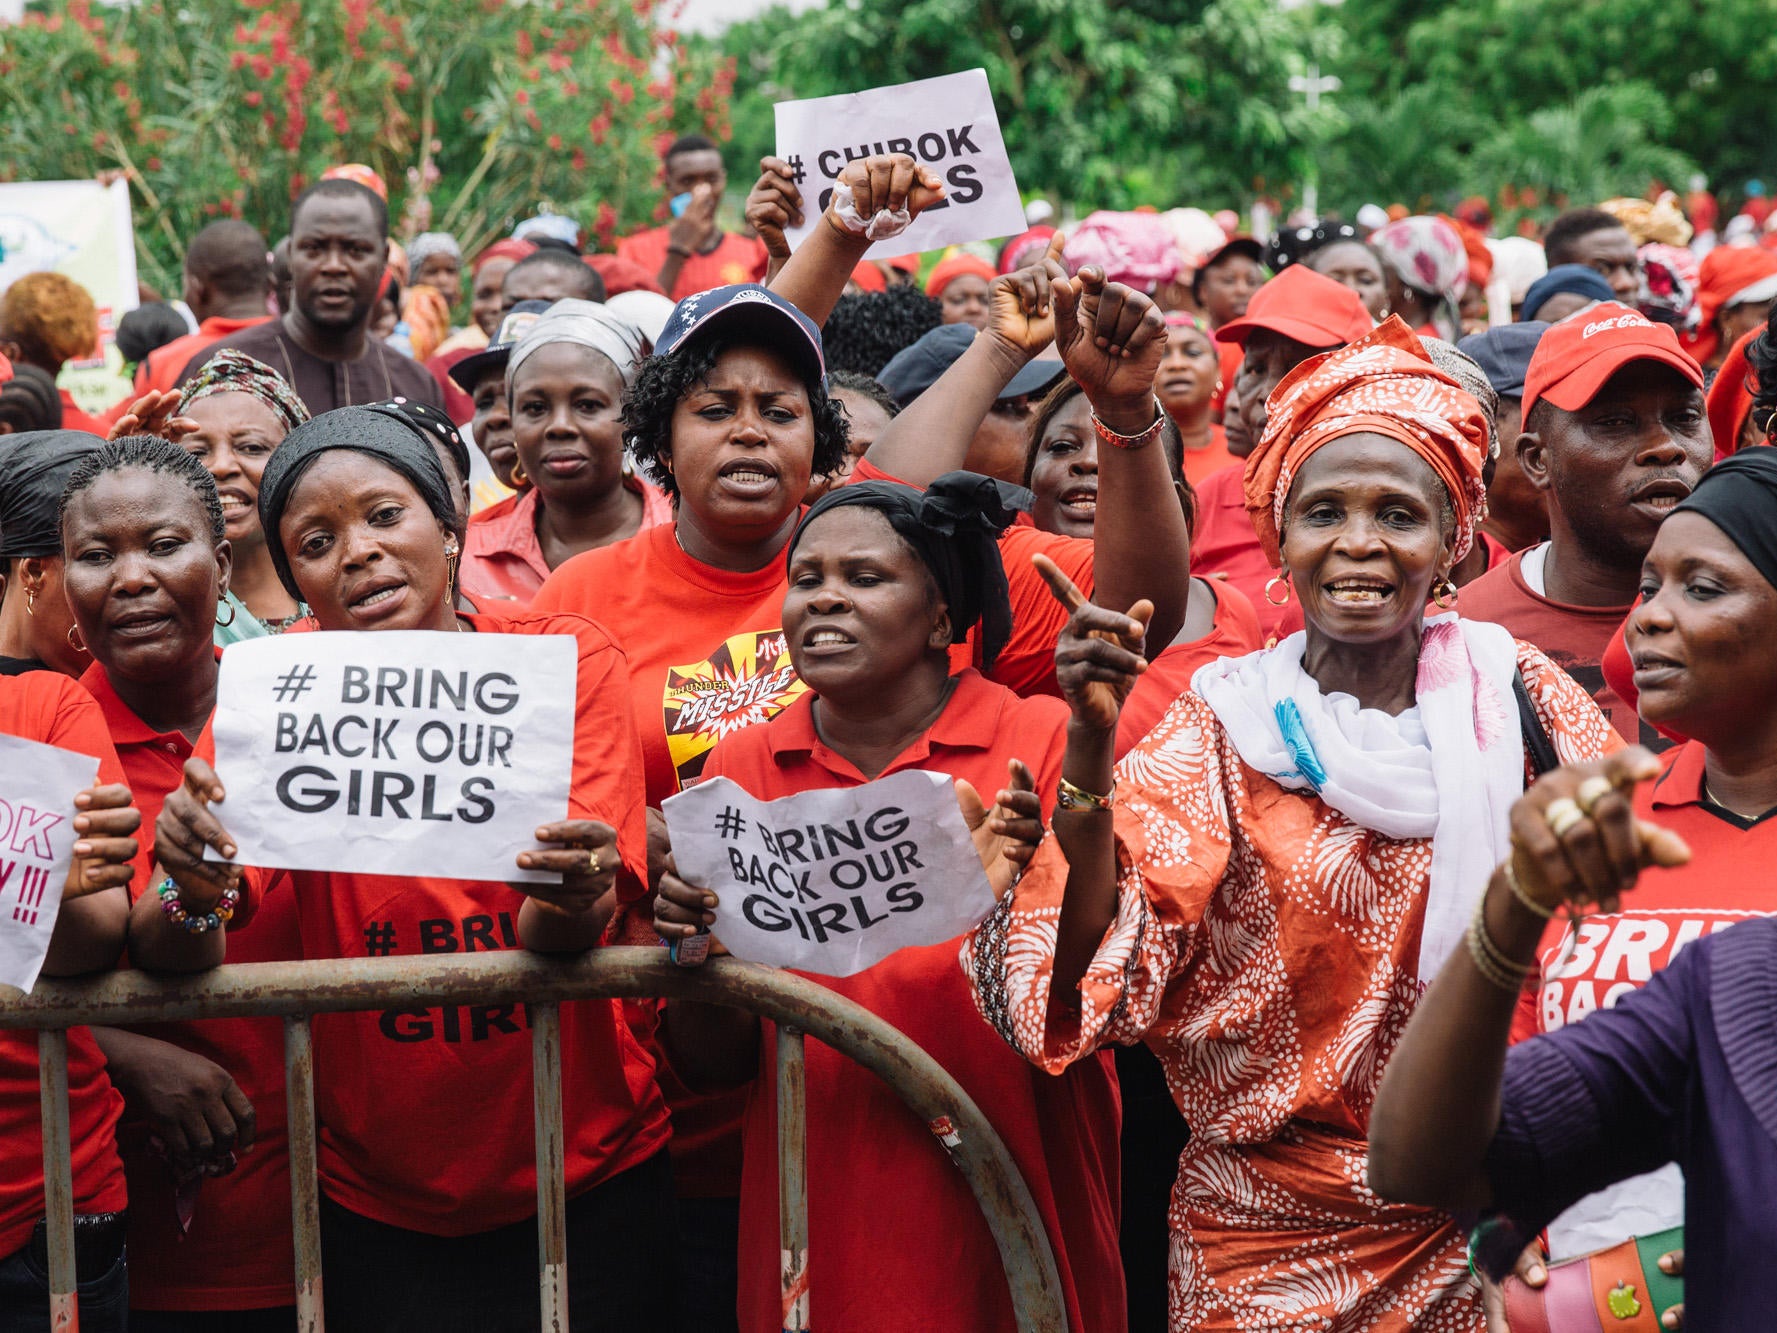 Protesters demand the return of some 200 schoolgirls abducted by Boko Haram in Nigeria